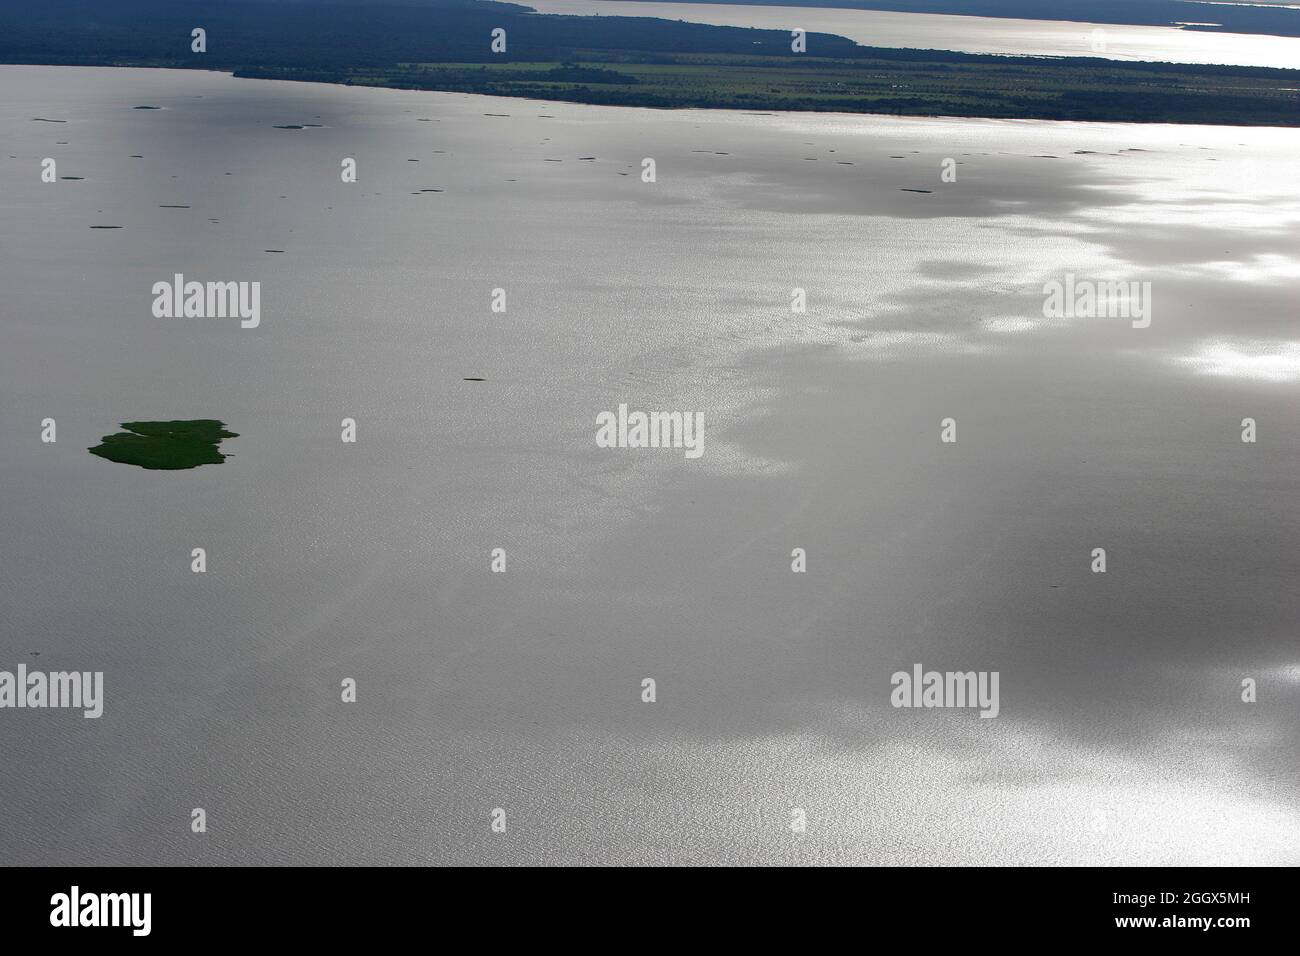 Aerial view of Tapajos river, a major tributary of the Amazon River. Stock Photo